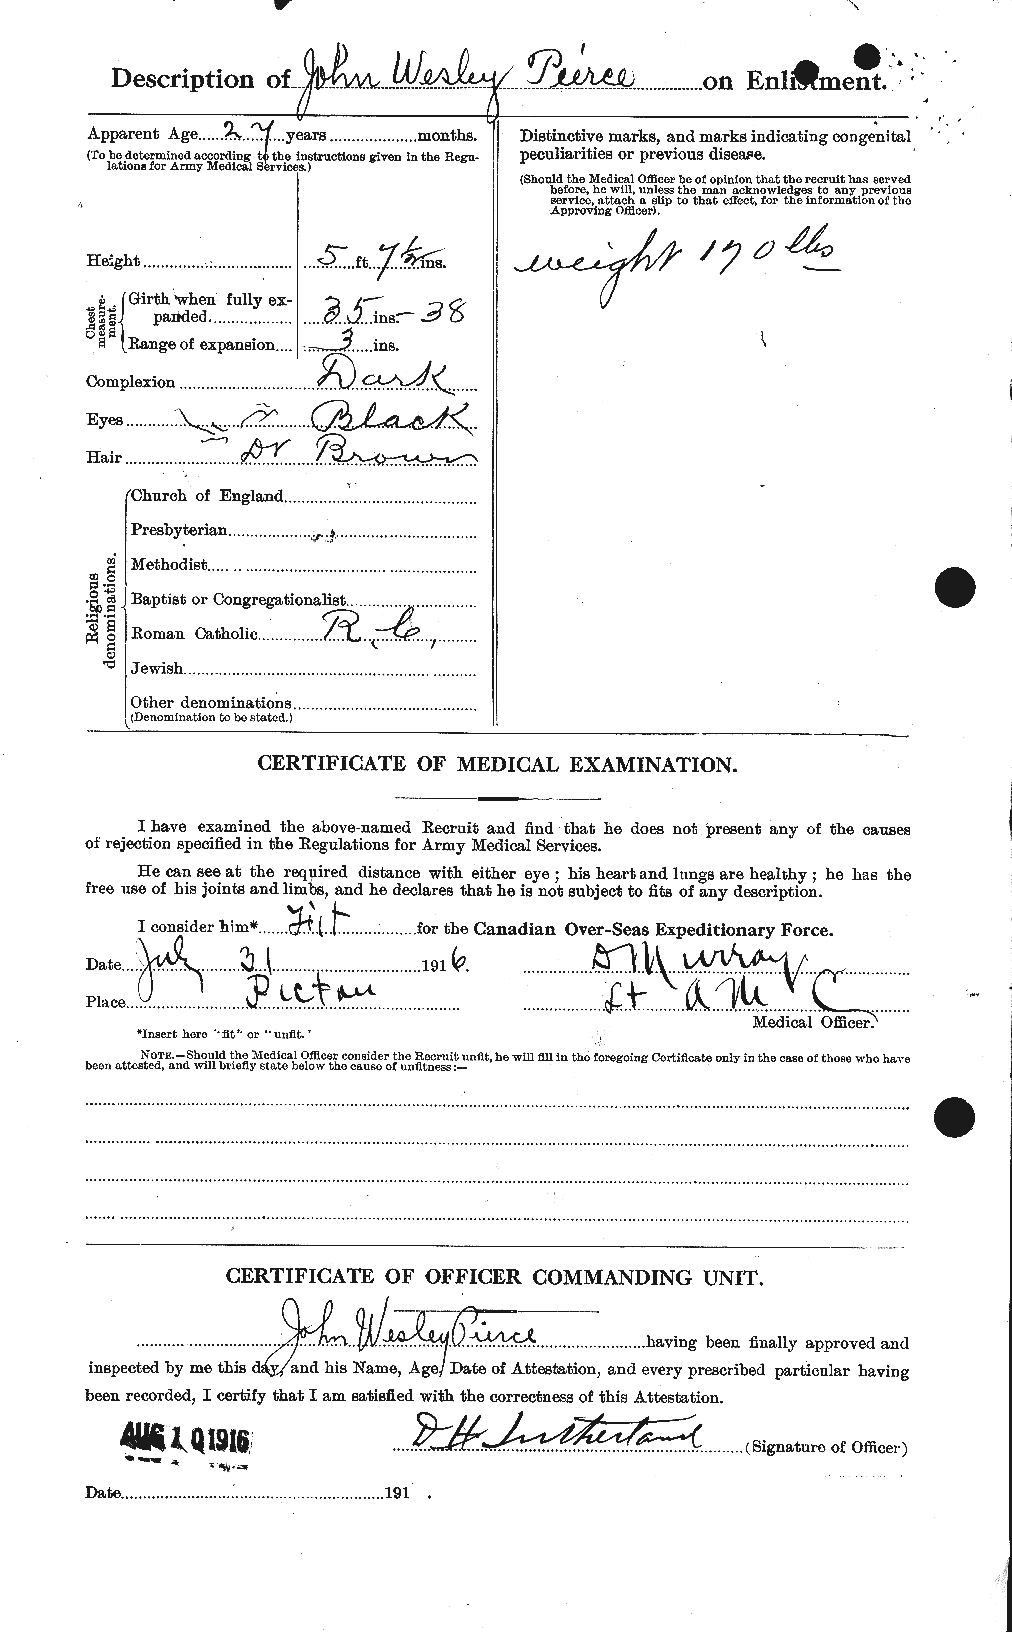 Personnel Records of the First World War - CEF 580849b